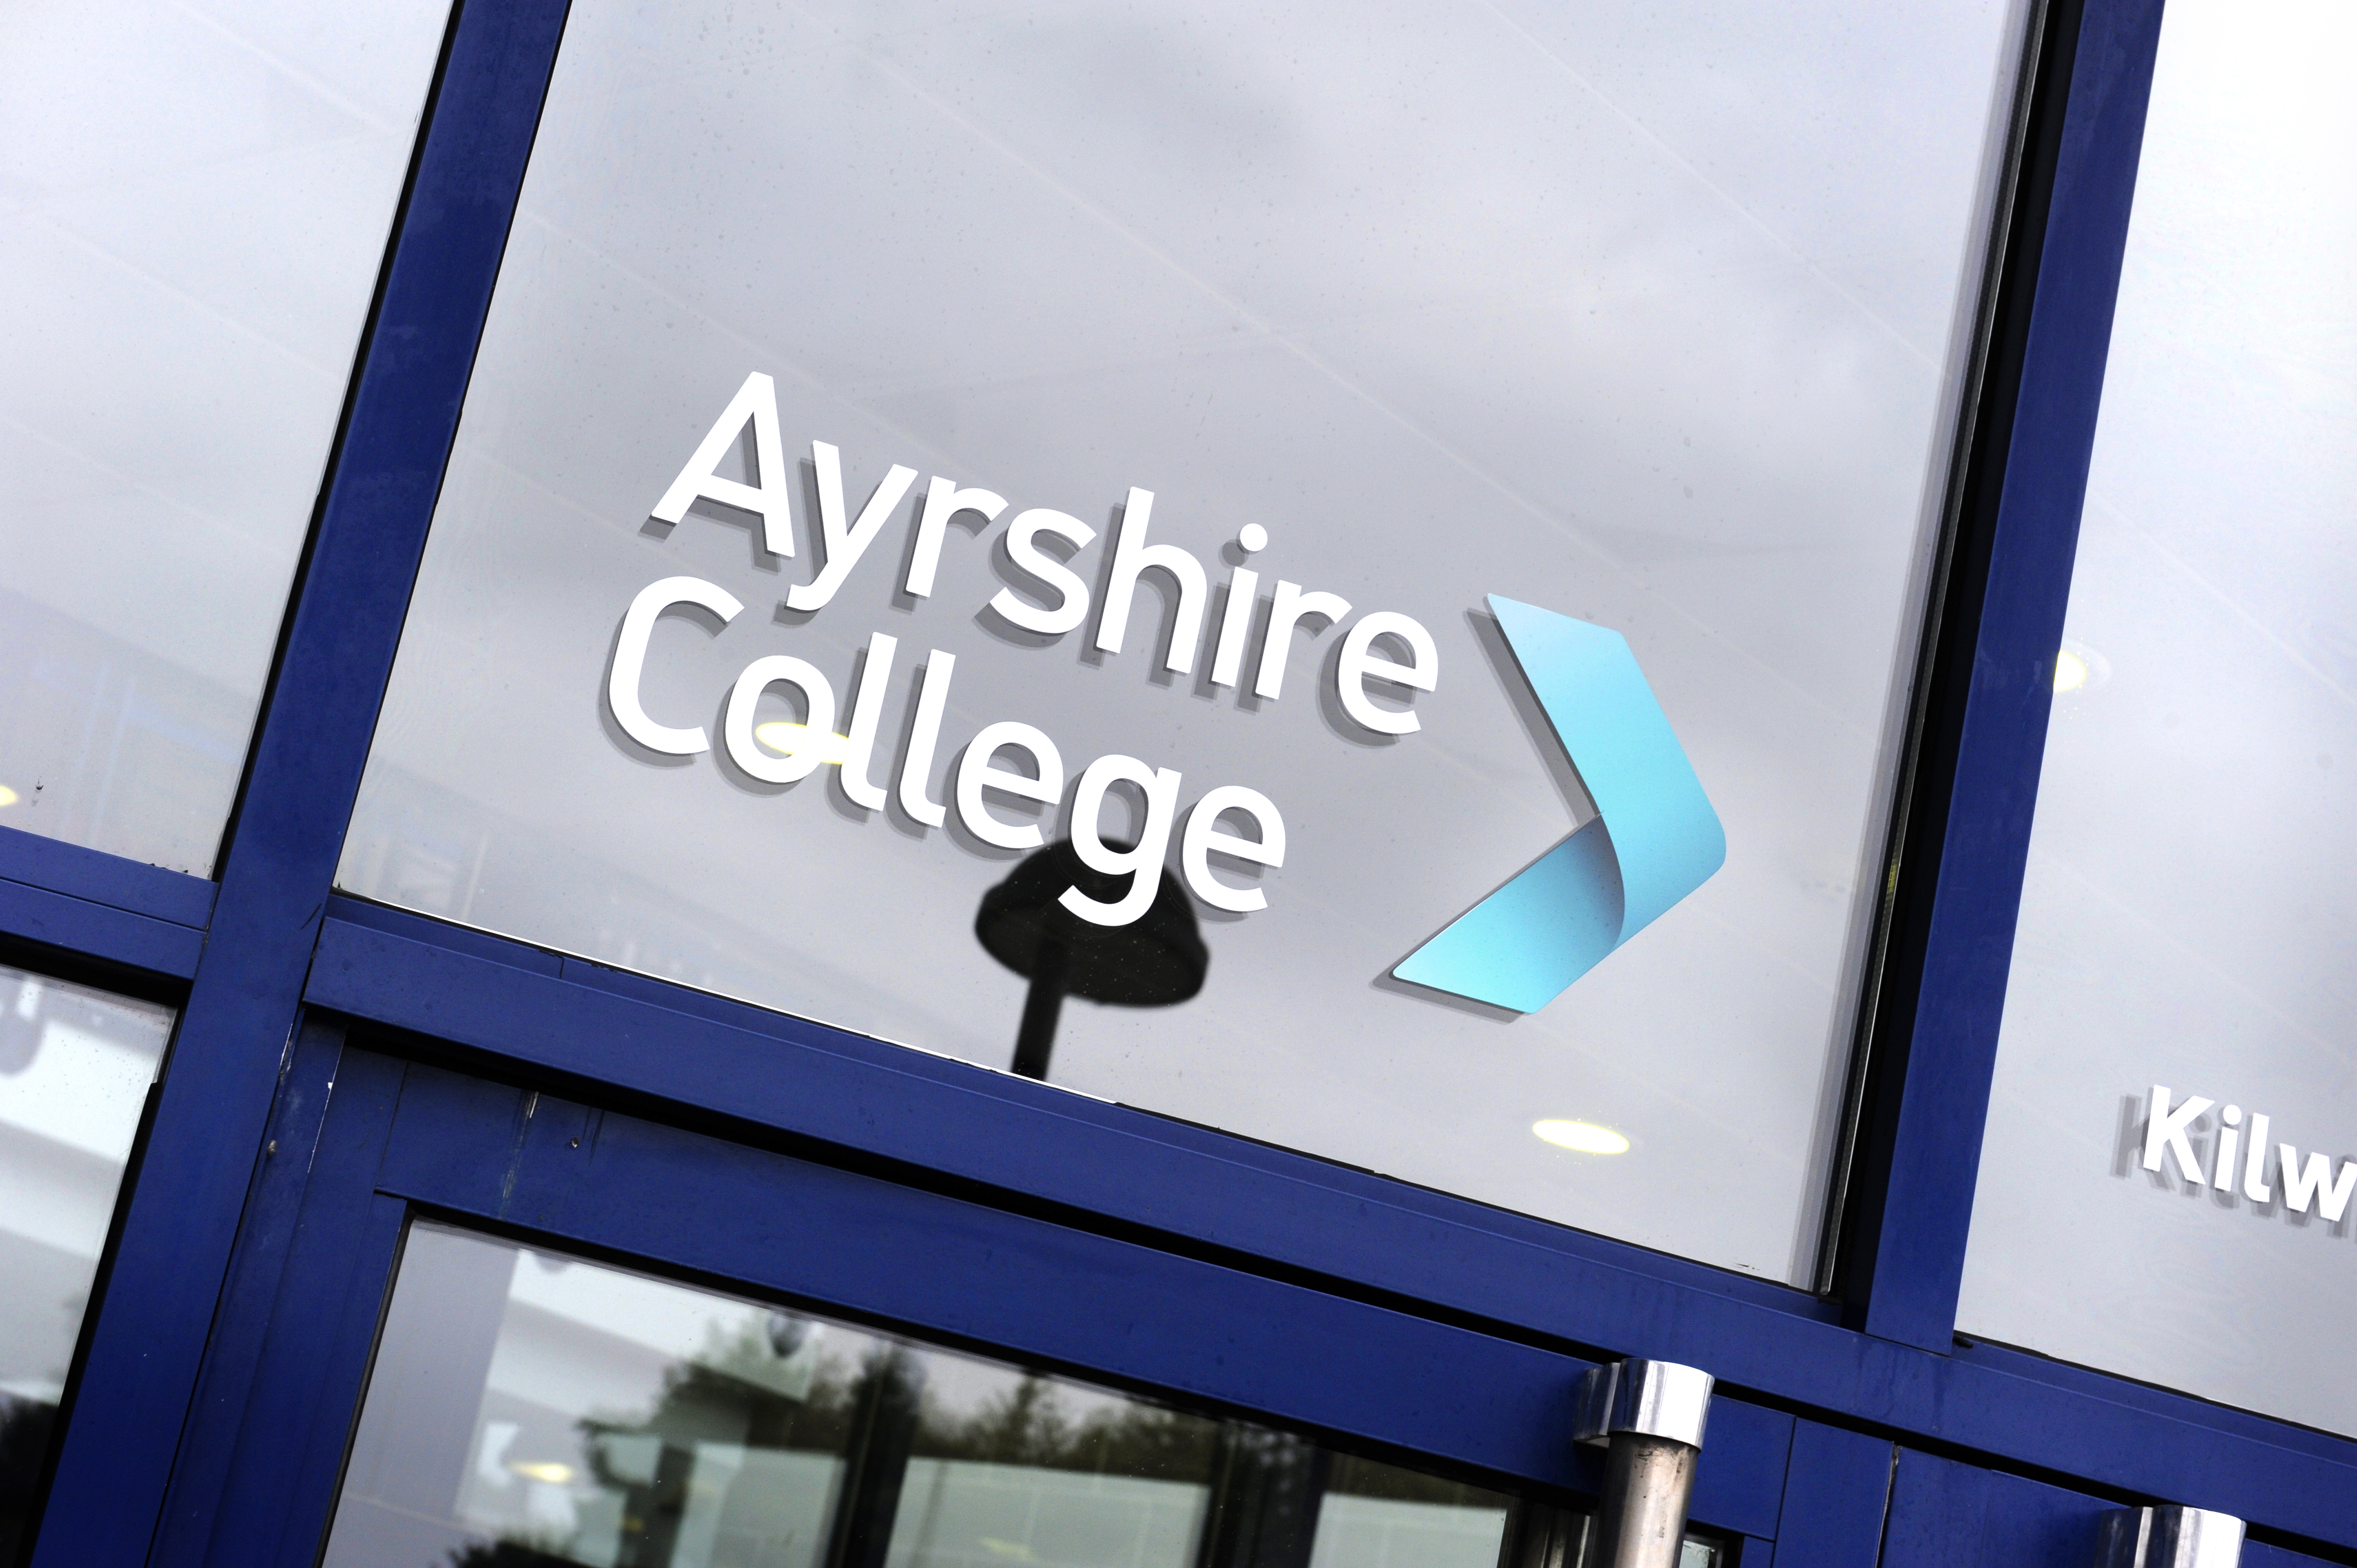 Ayrshire College adapts to new way of working